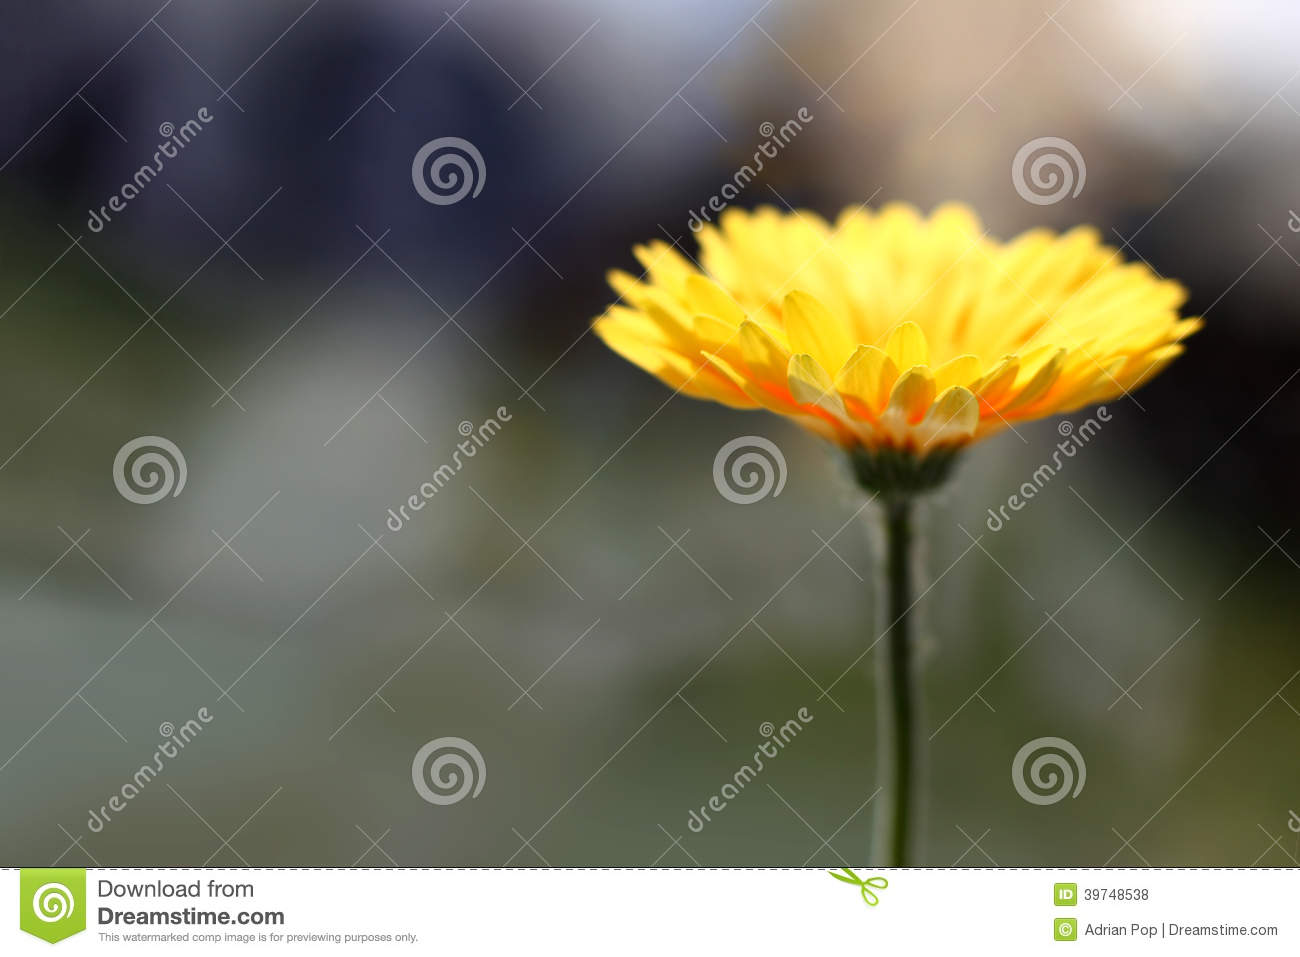 Beautiful Yellow Flower With Soft Focus In Warm Glowing Light 